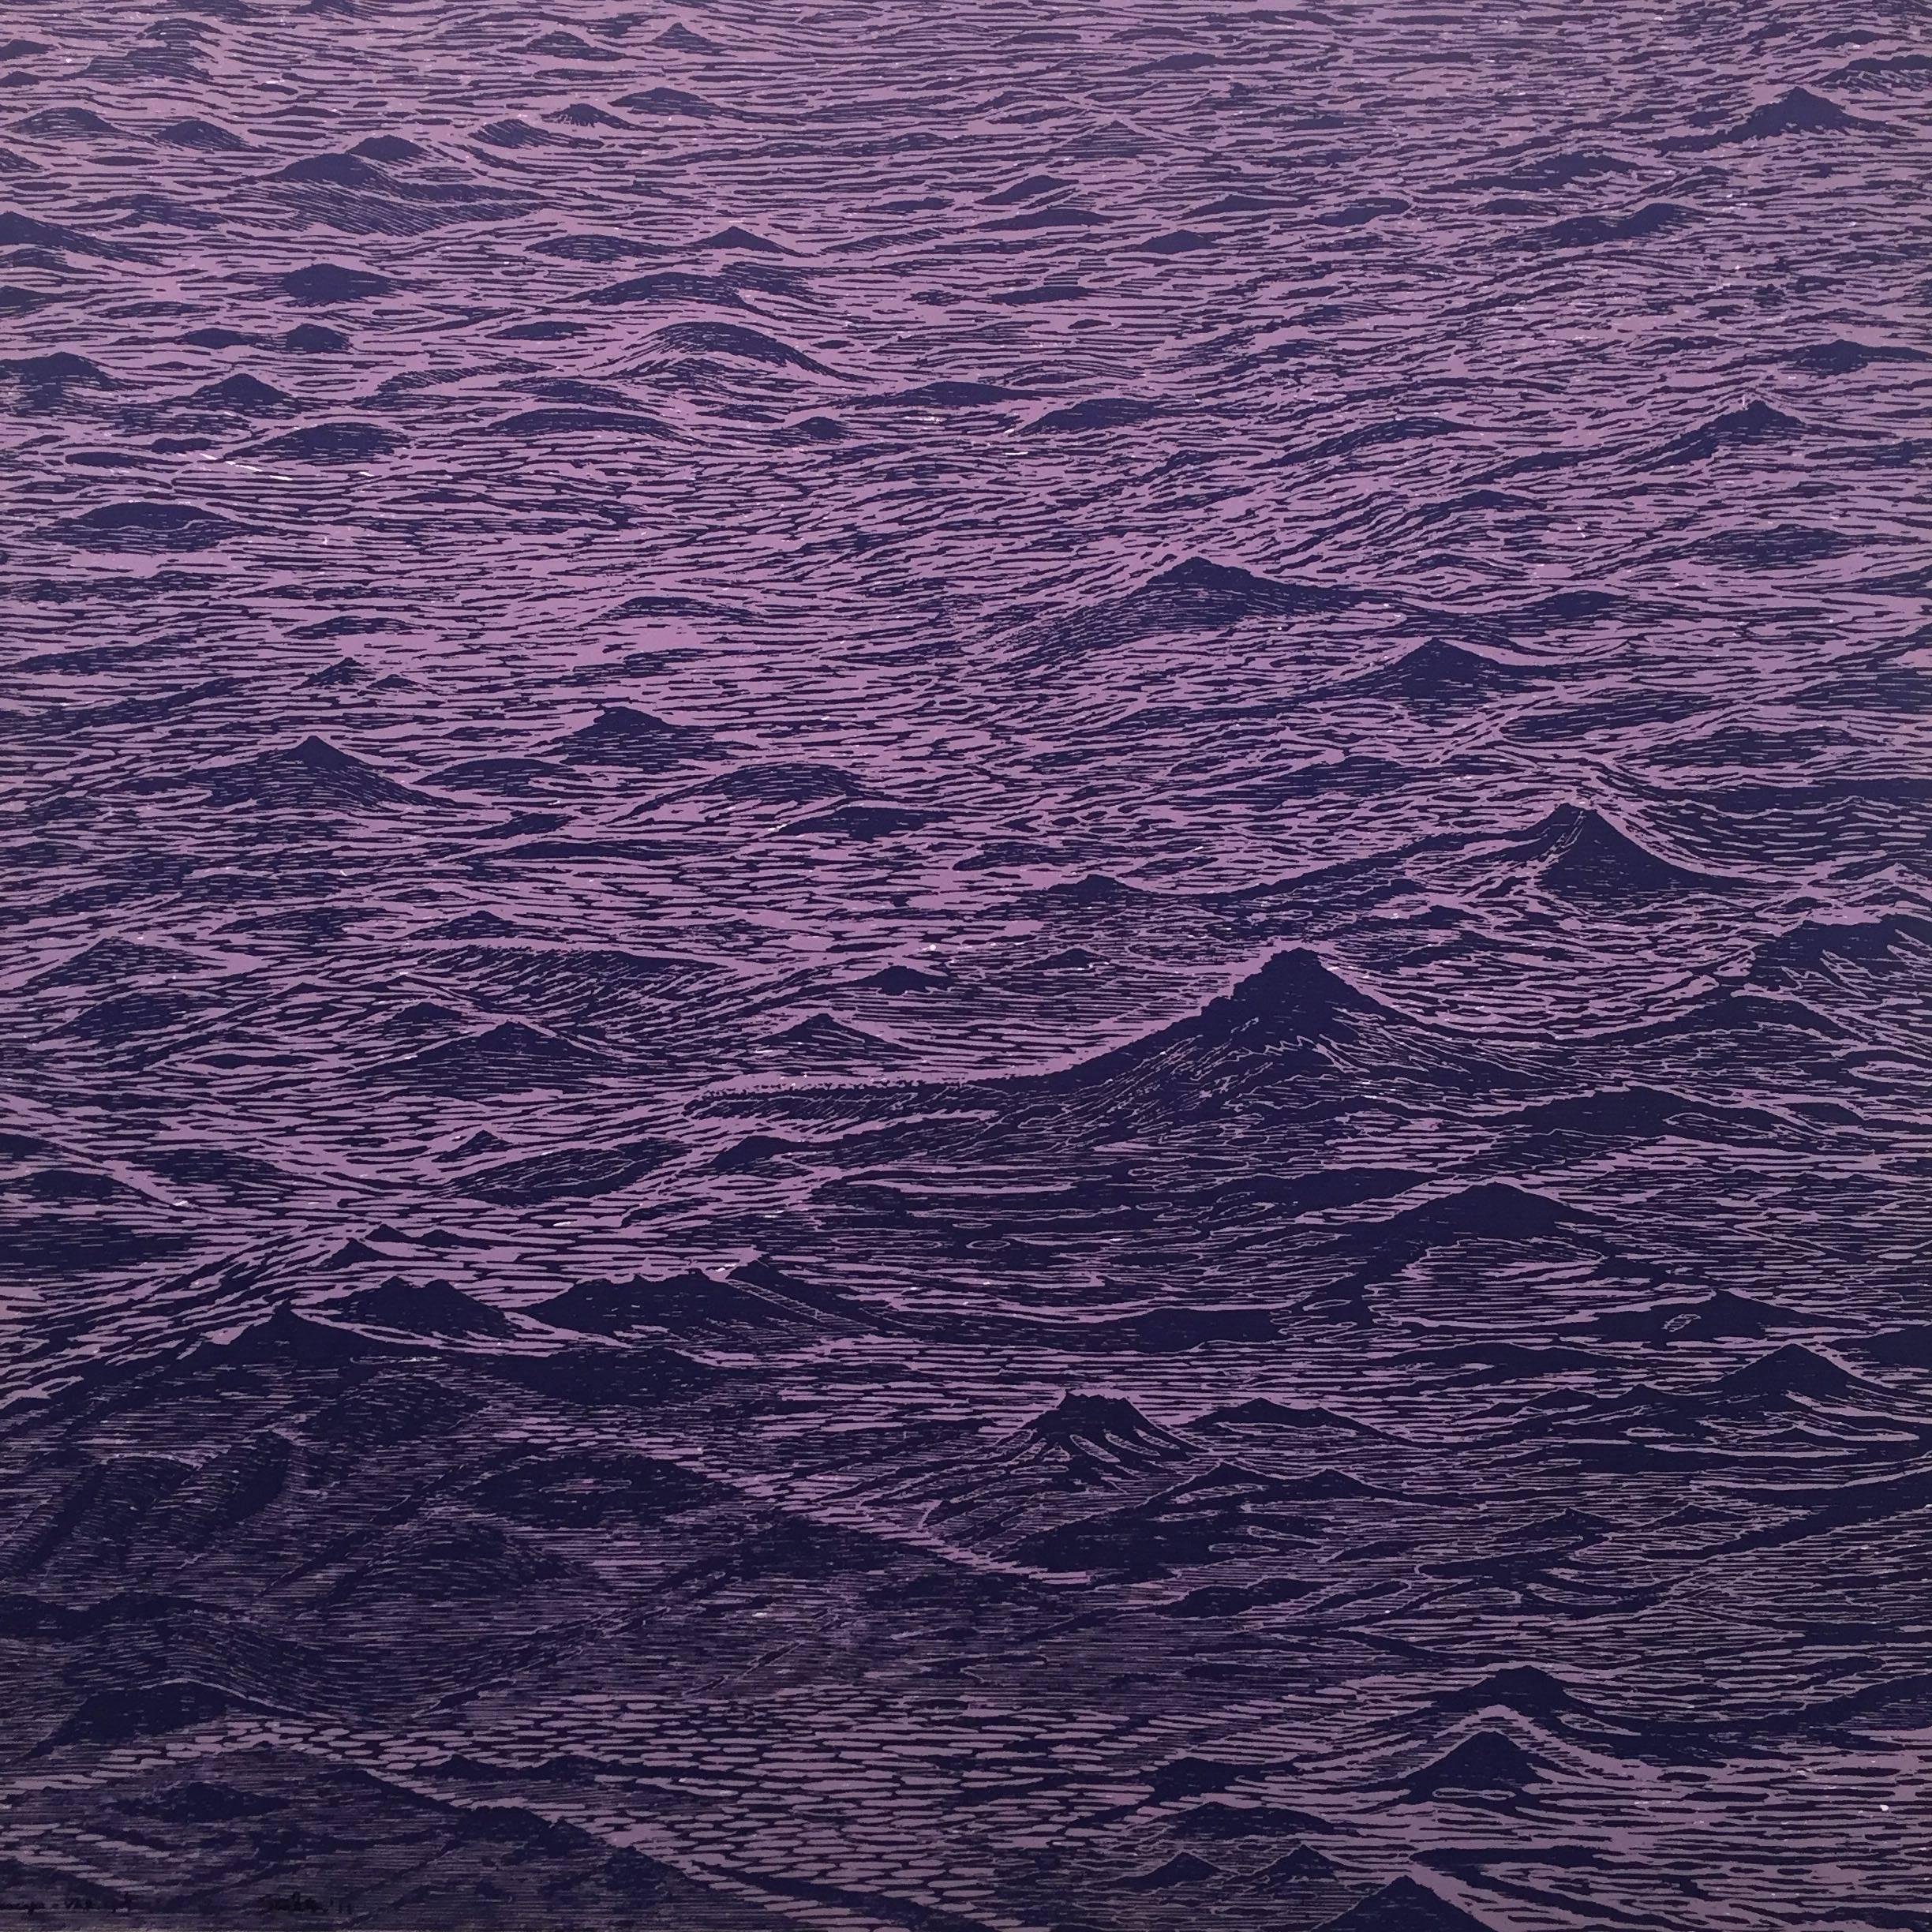 Eve Stockton Abstract Print - Seascape One, Ocean Waves Woodcut Print, Pale Lavender and Dark Violet Purple